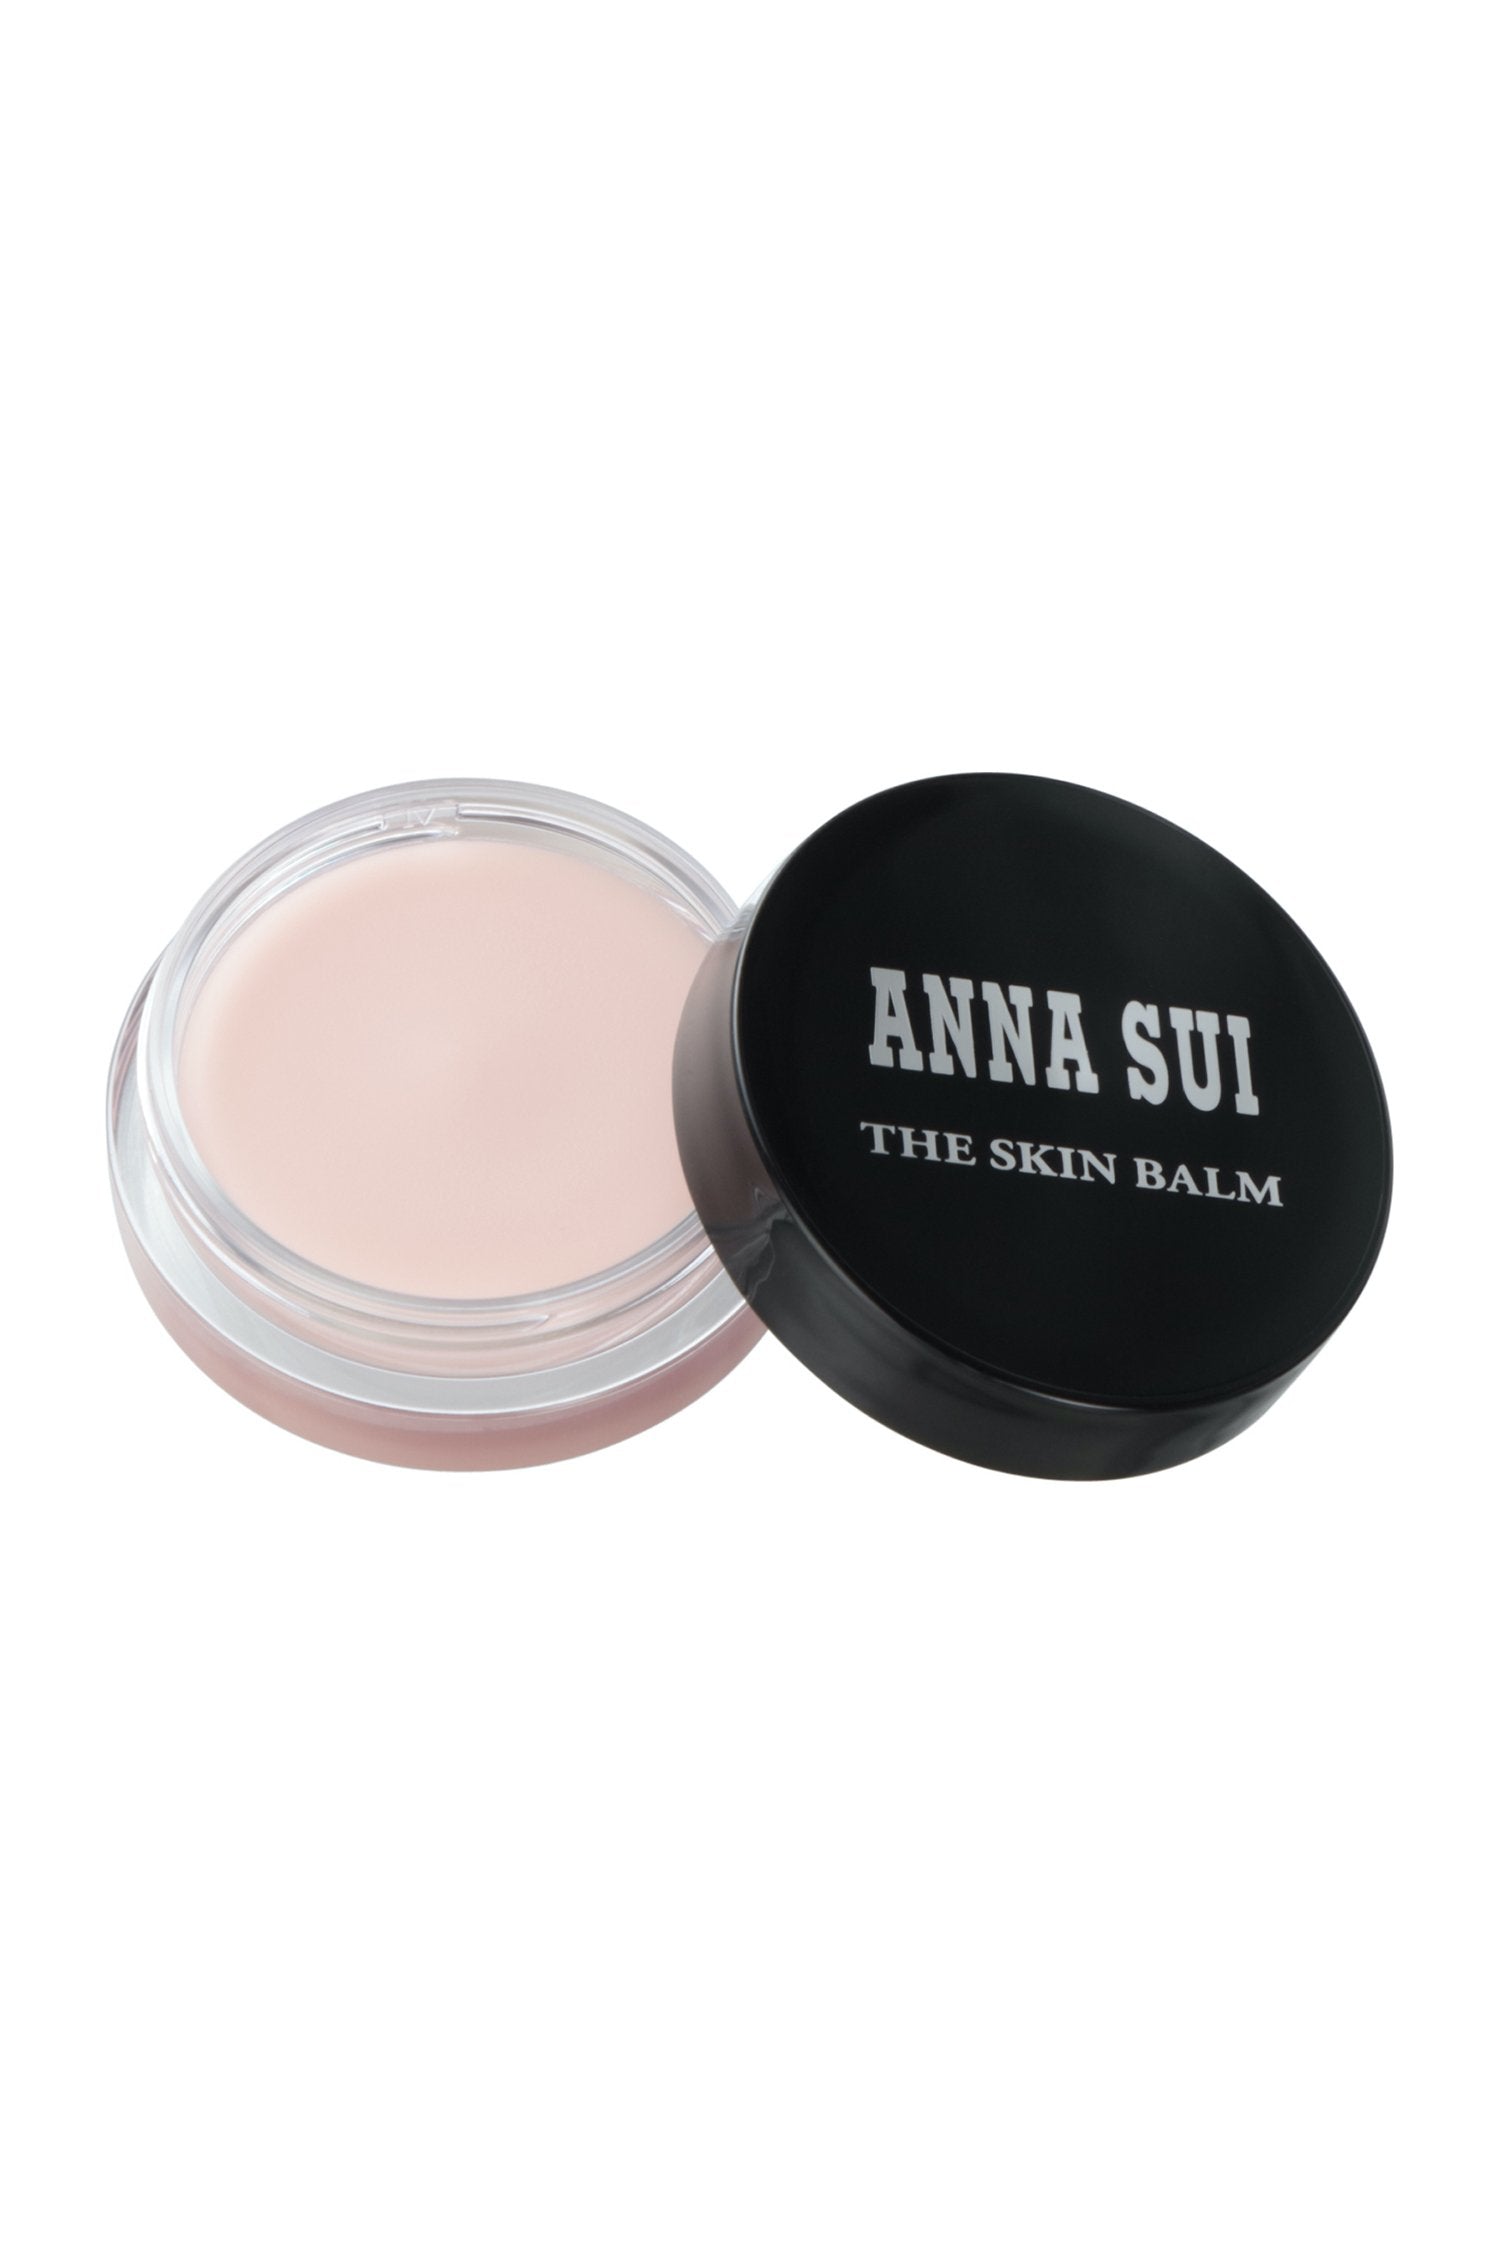 Round case transparent bottom, and black lid with Anna Sui in white and “The Skin Balm” in white